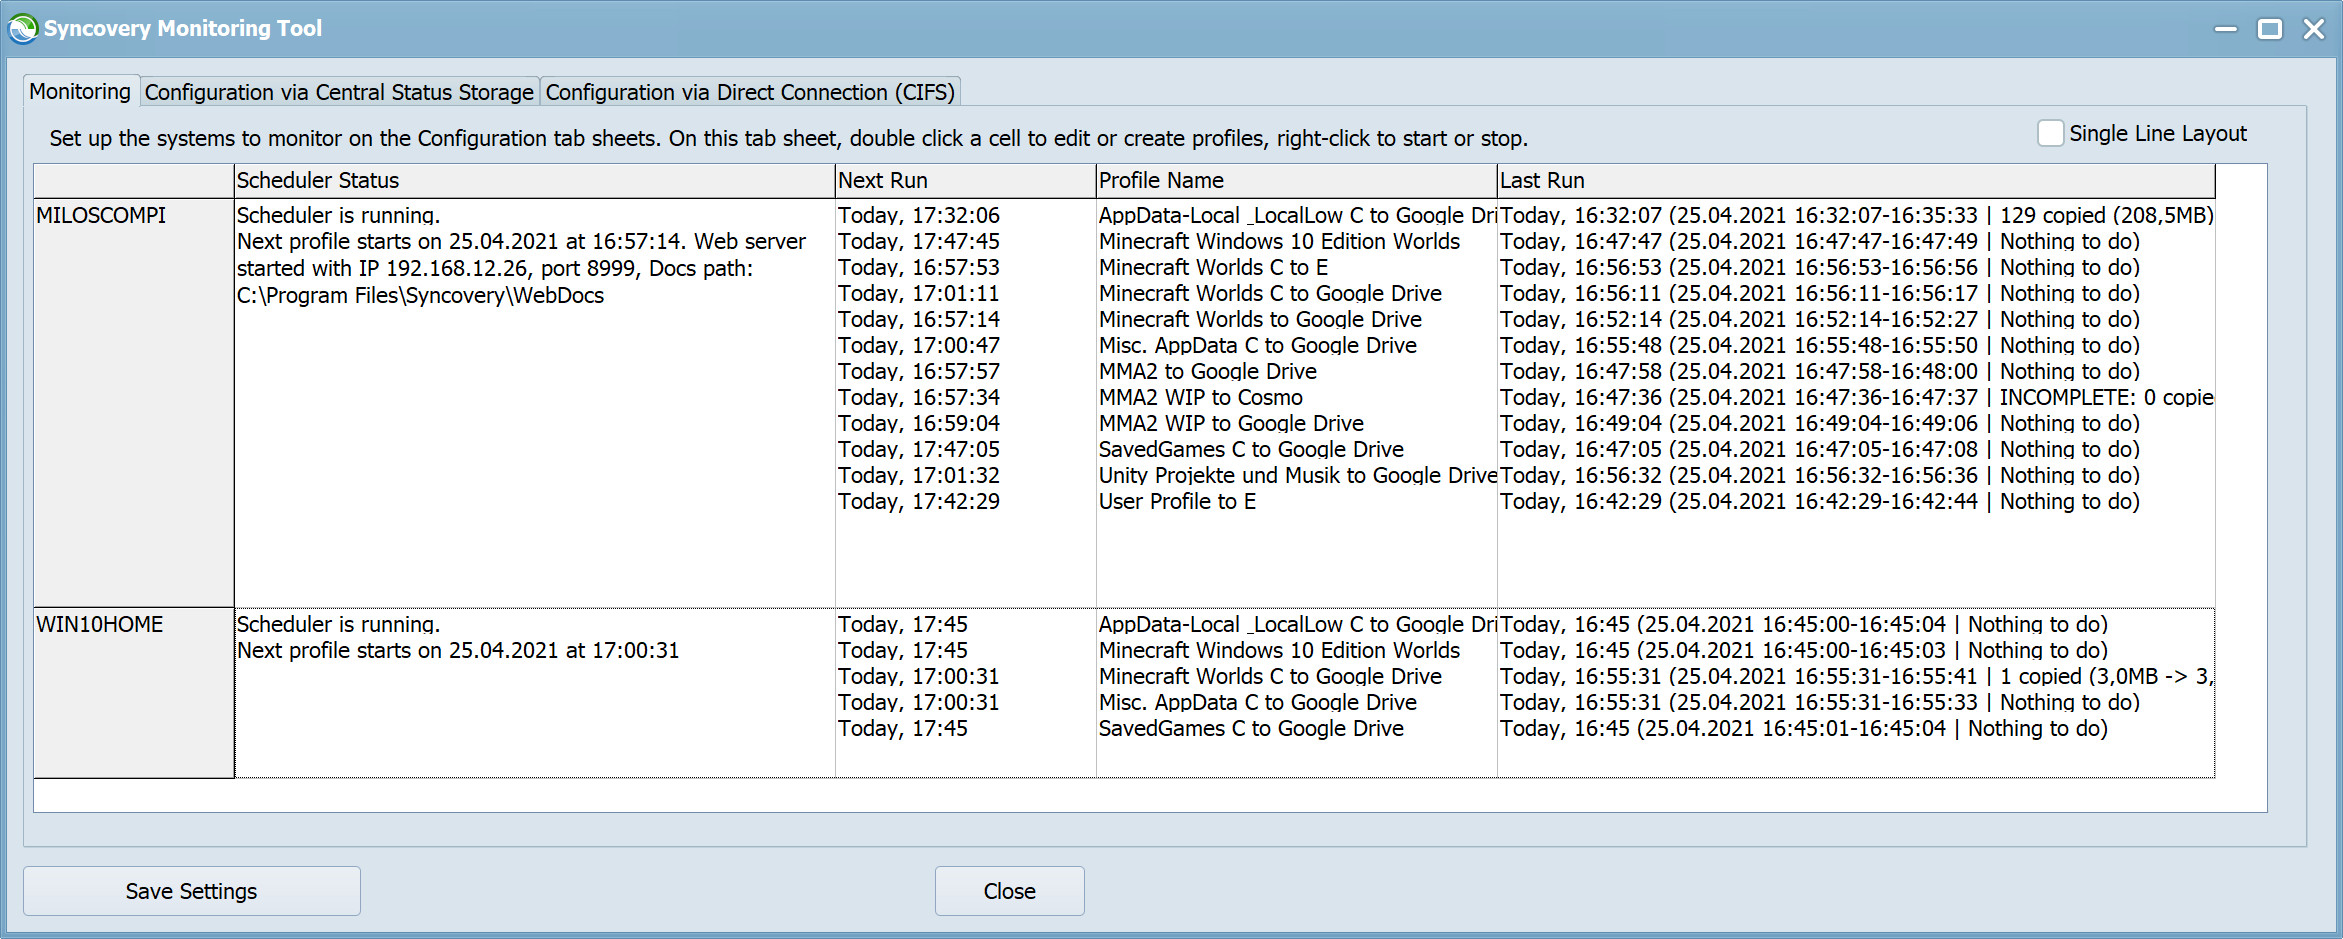 A screenshot showing monitoring results obtained via Windows networking (CIFS)